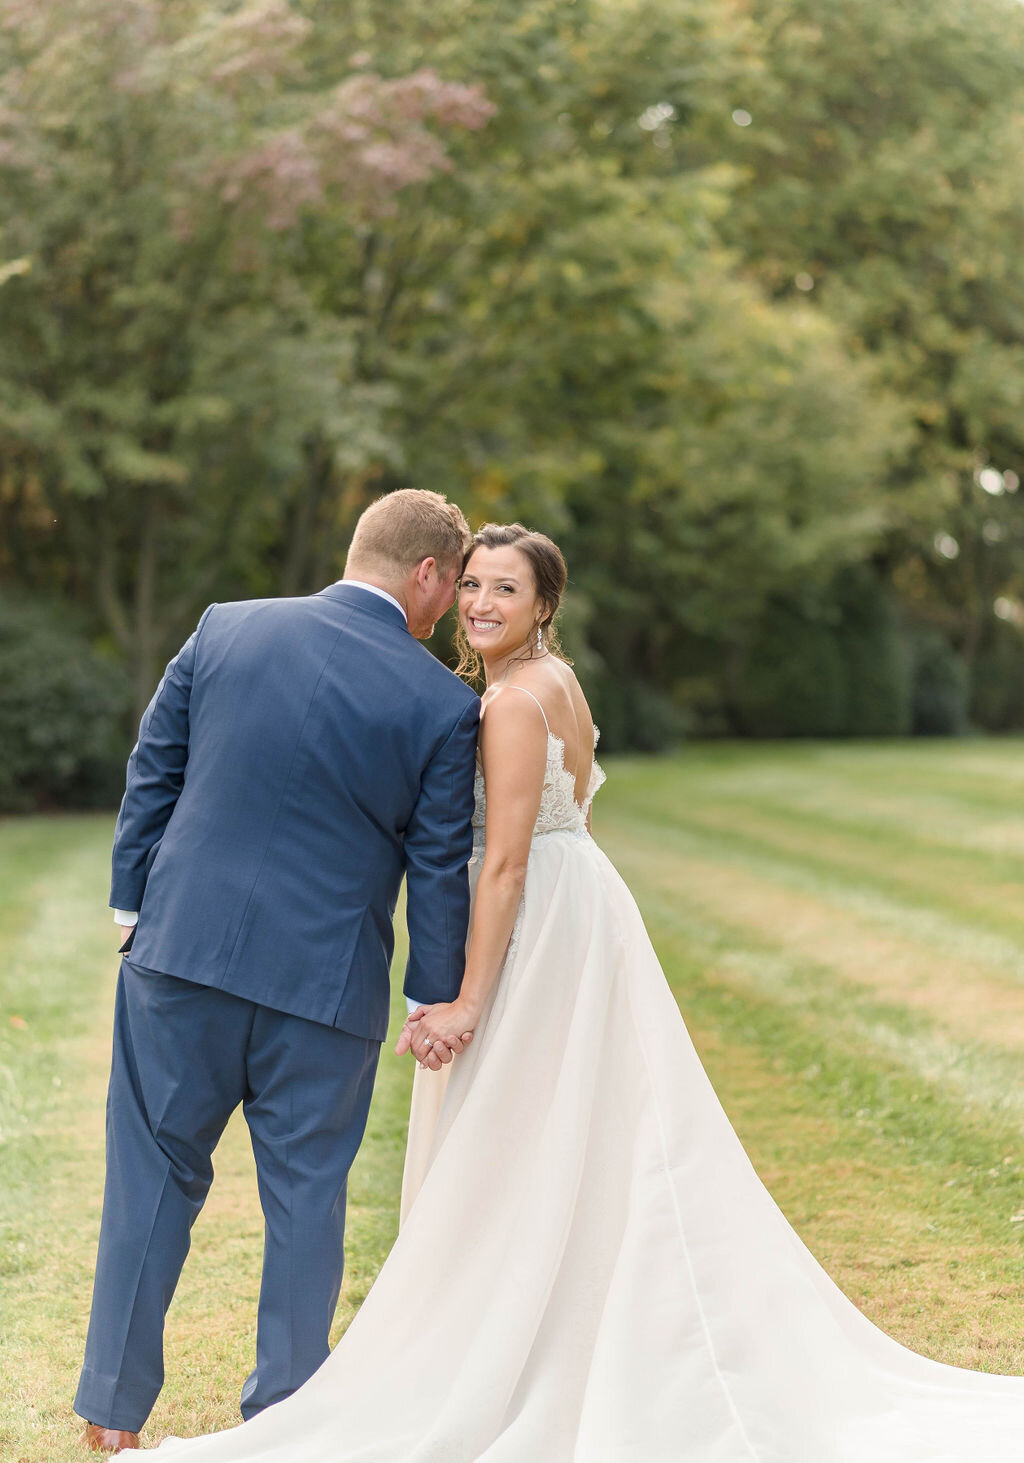 Faced with having to cancel their original plans, Alexia and CJ re-planned their wedding day in just three months. Opting for a romantic micro wedding in the bride’s parent’s backyard in New Ringgold, Pennsylvania. Photographed by Sarah Brookhart Ph…